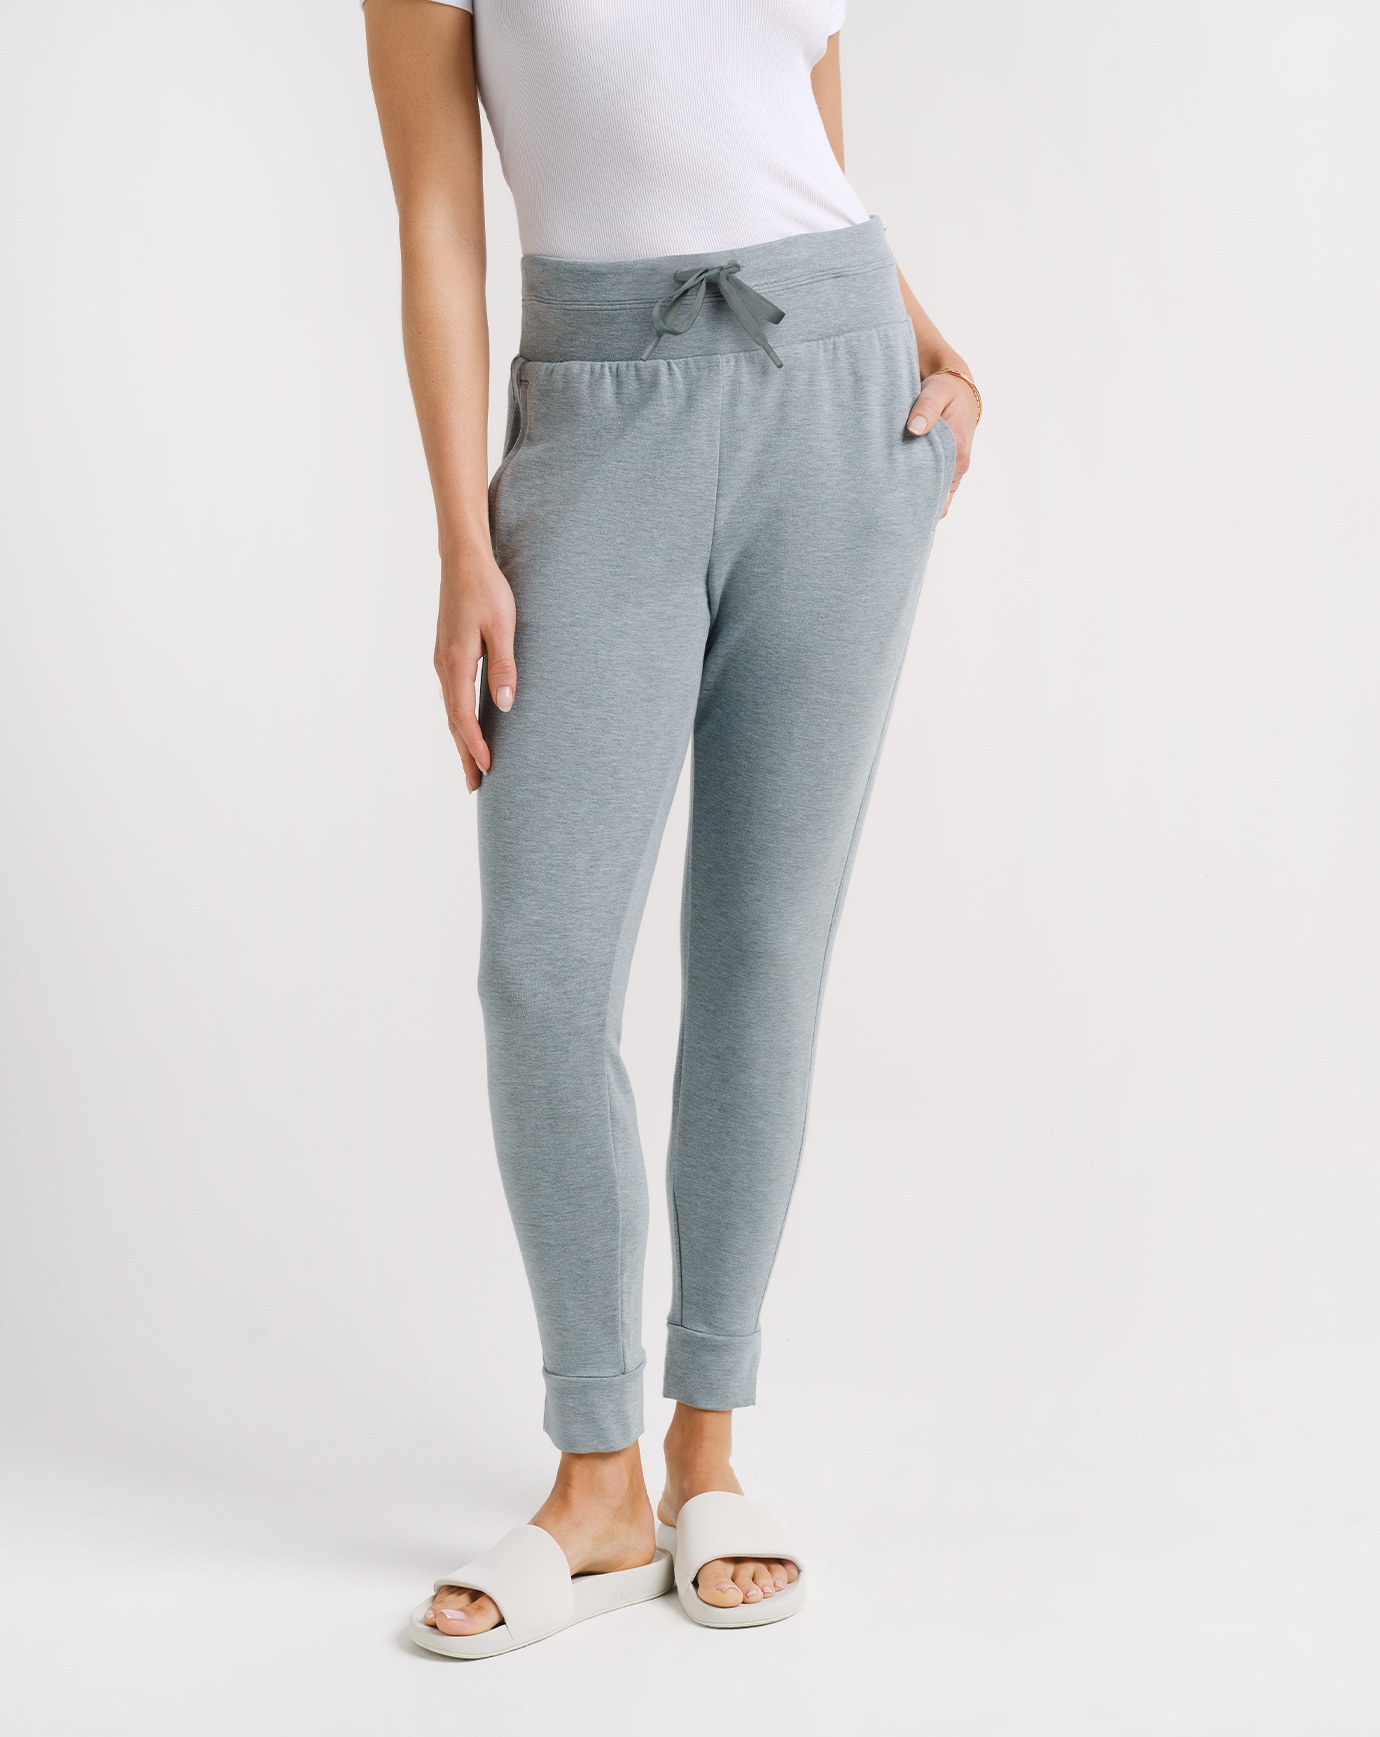 ADELAIDE CLOUD FRENCH TERRY JOGGER_1LC014_3HGR_